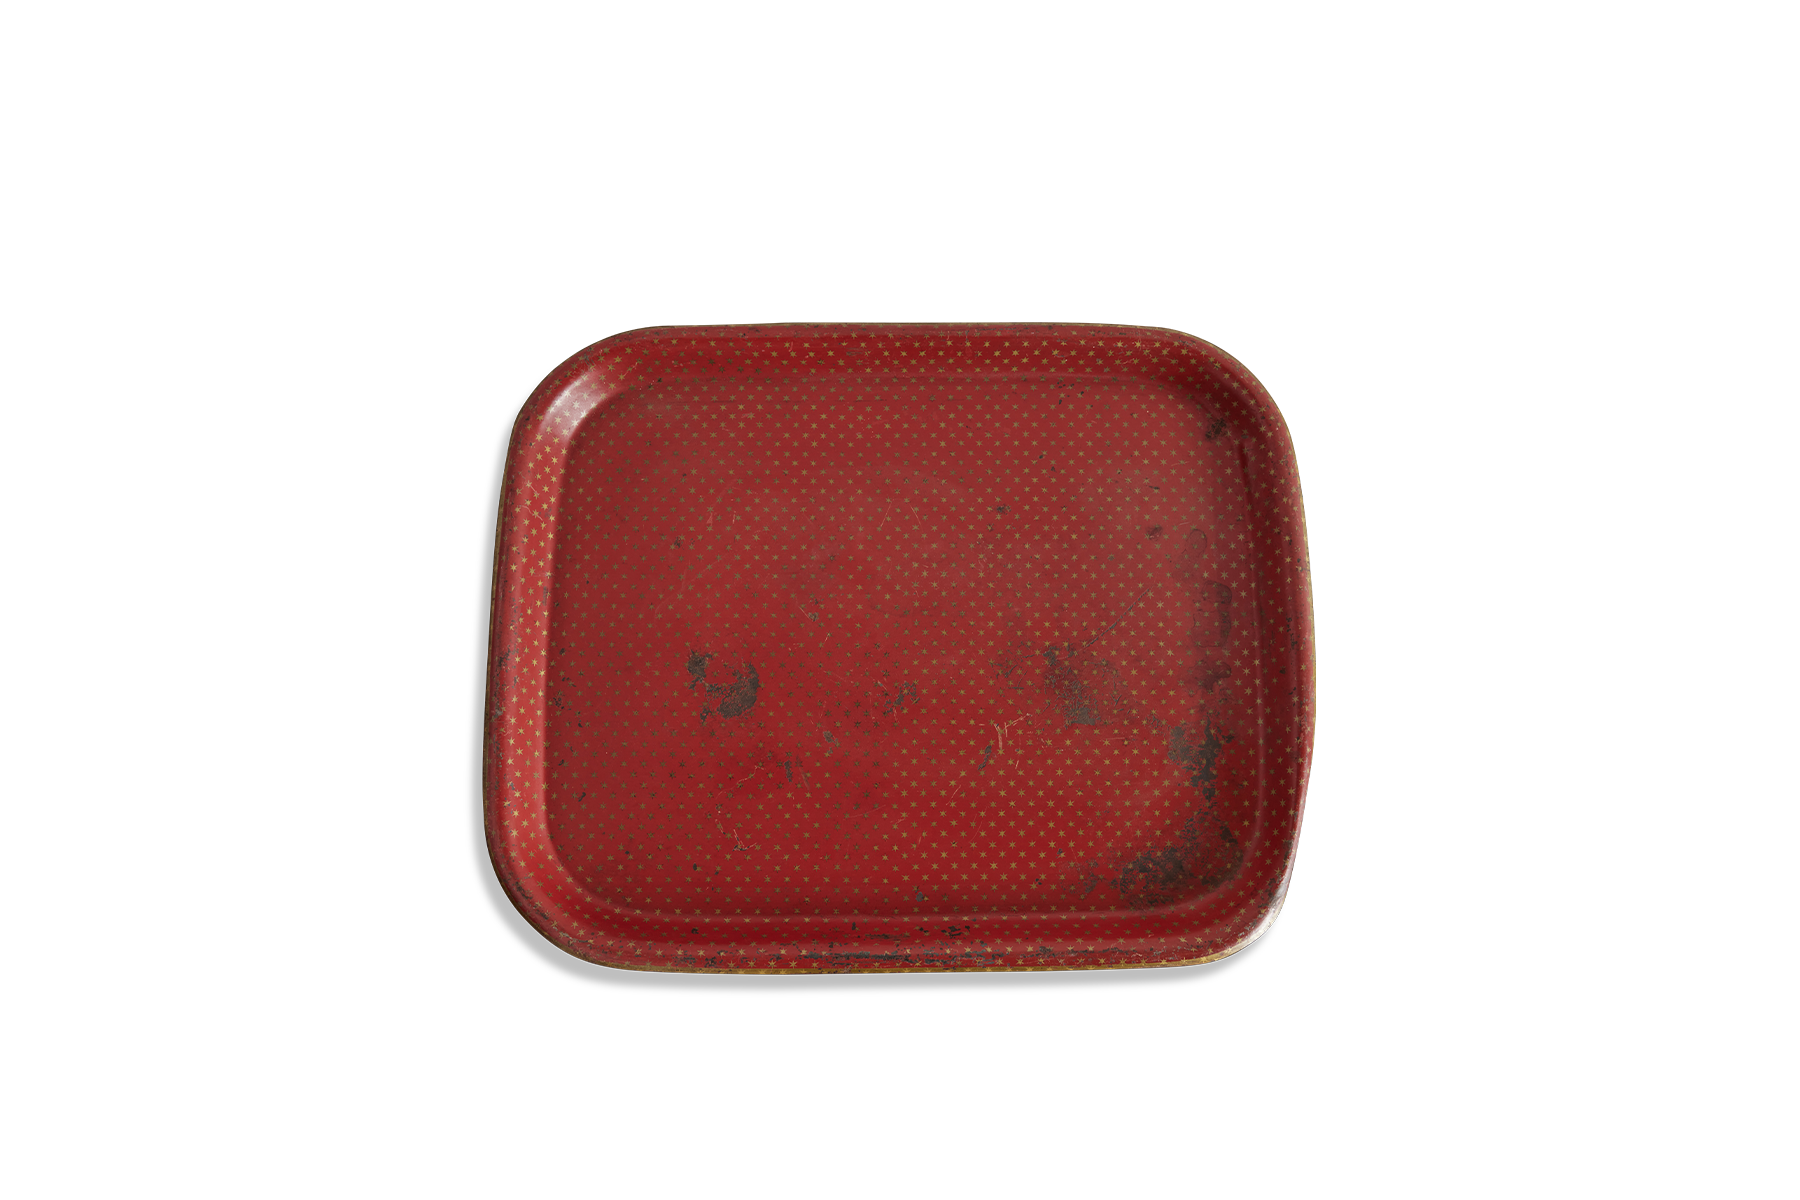 Red Ottoman Tray